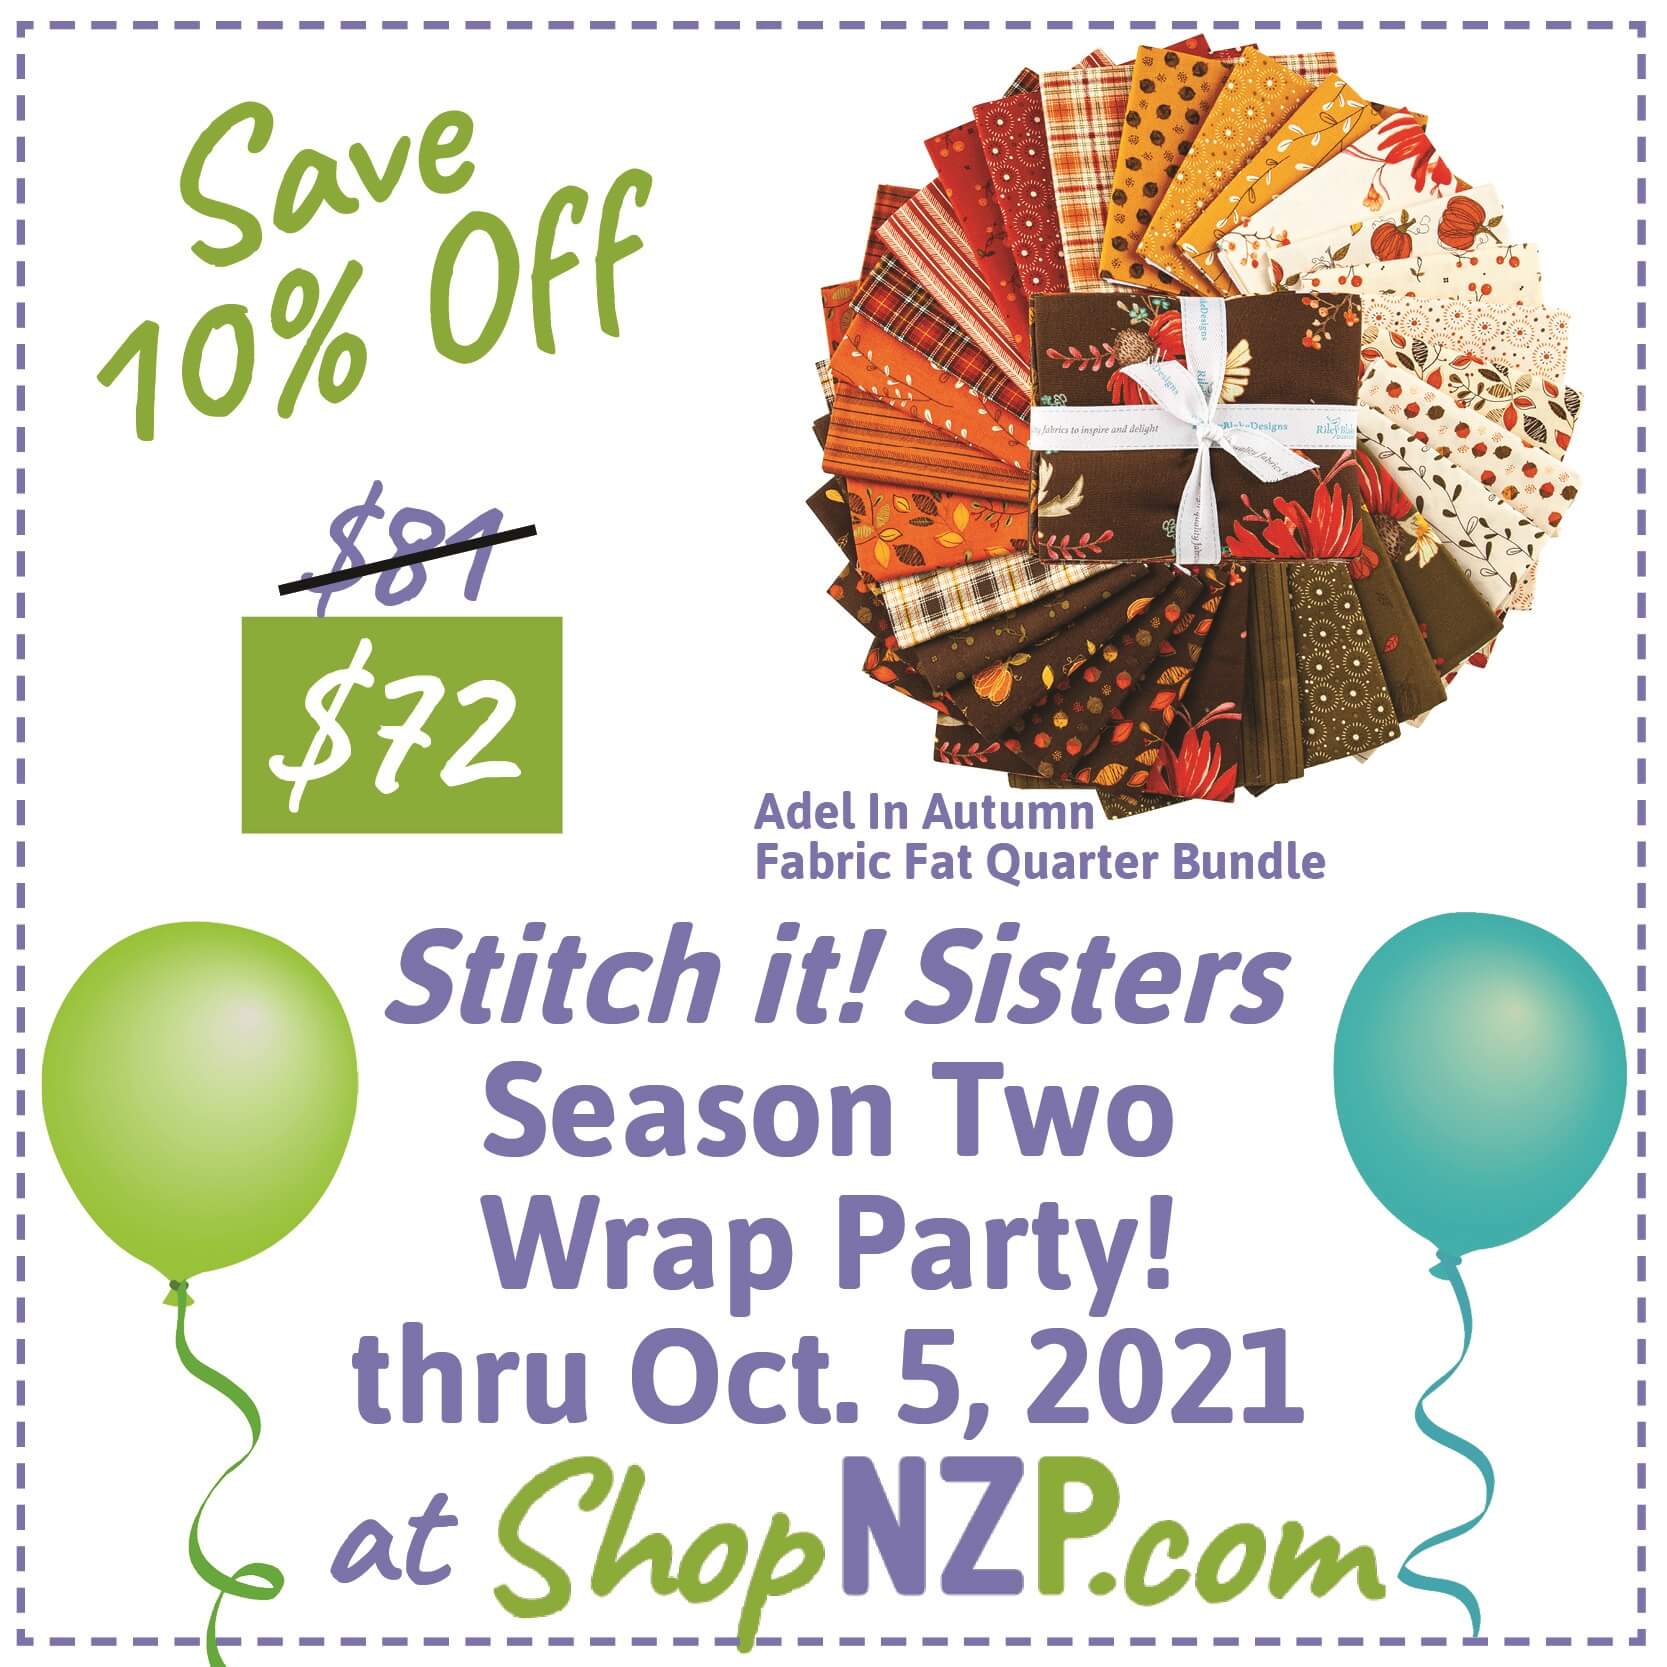 Stitch it Sisters Season Two Wrap Party! thru Oct. 5, 2021 at Nancy Zieman Productions at ShopNZP